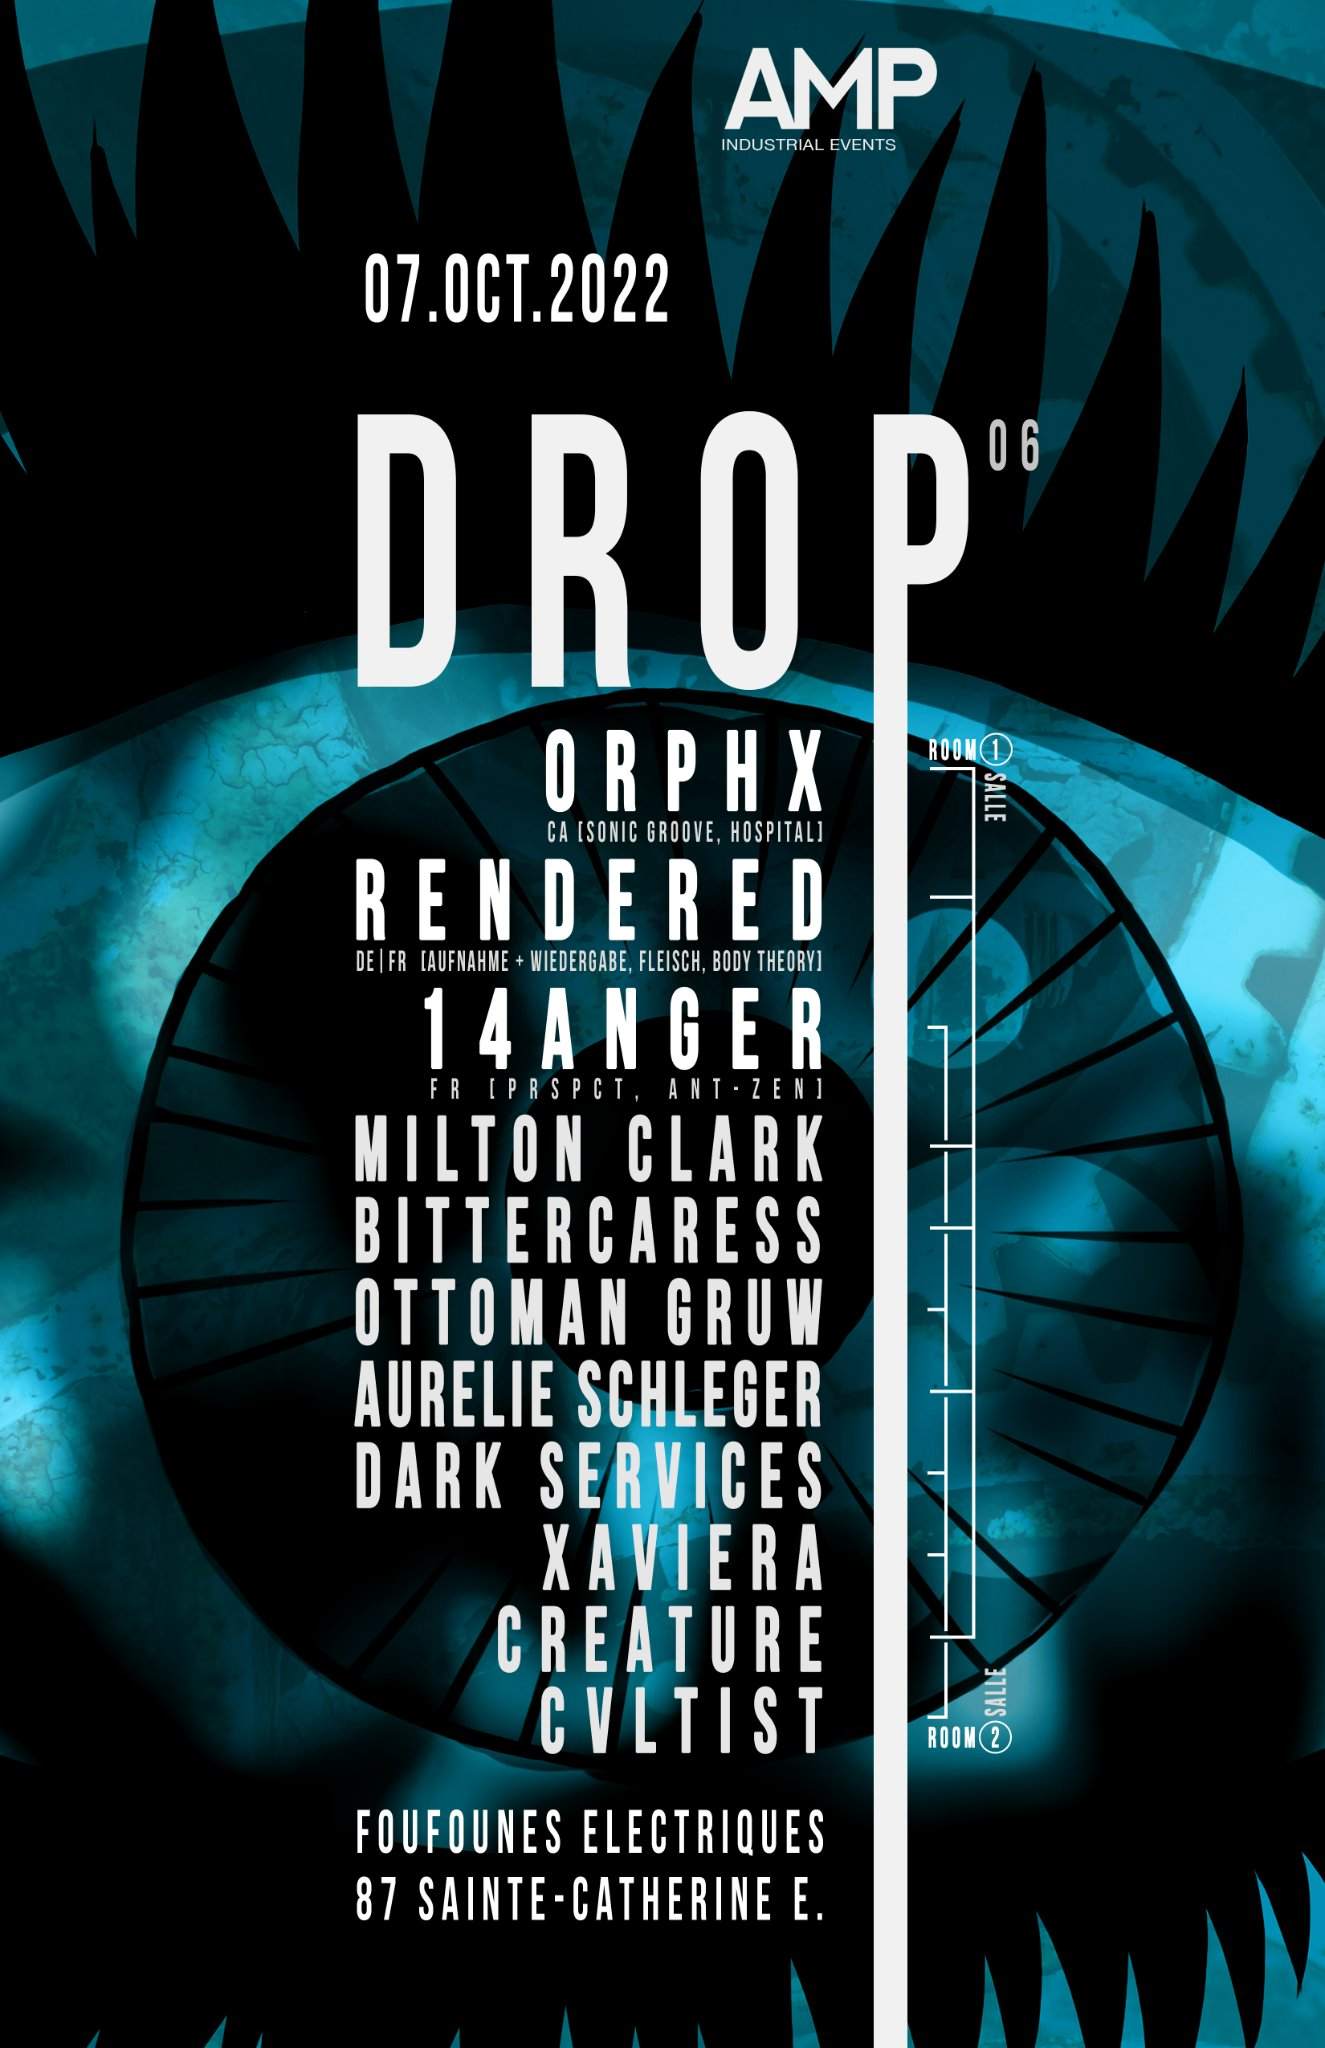 DROP [06] - Orphx, Rendered, 14anger and Guests - フライヤー裏